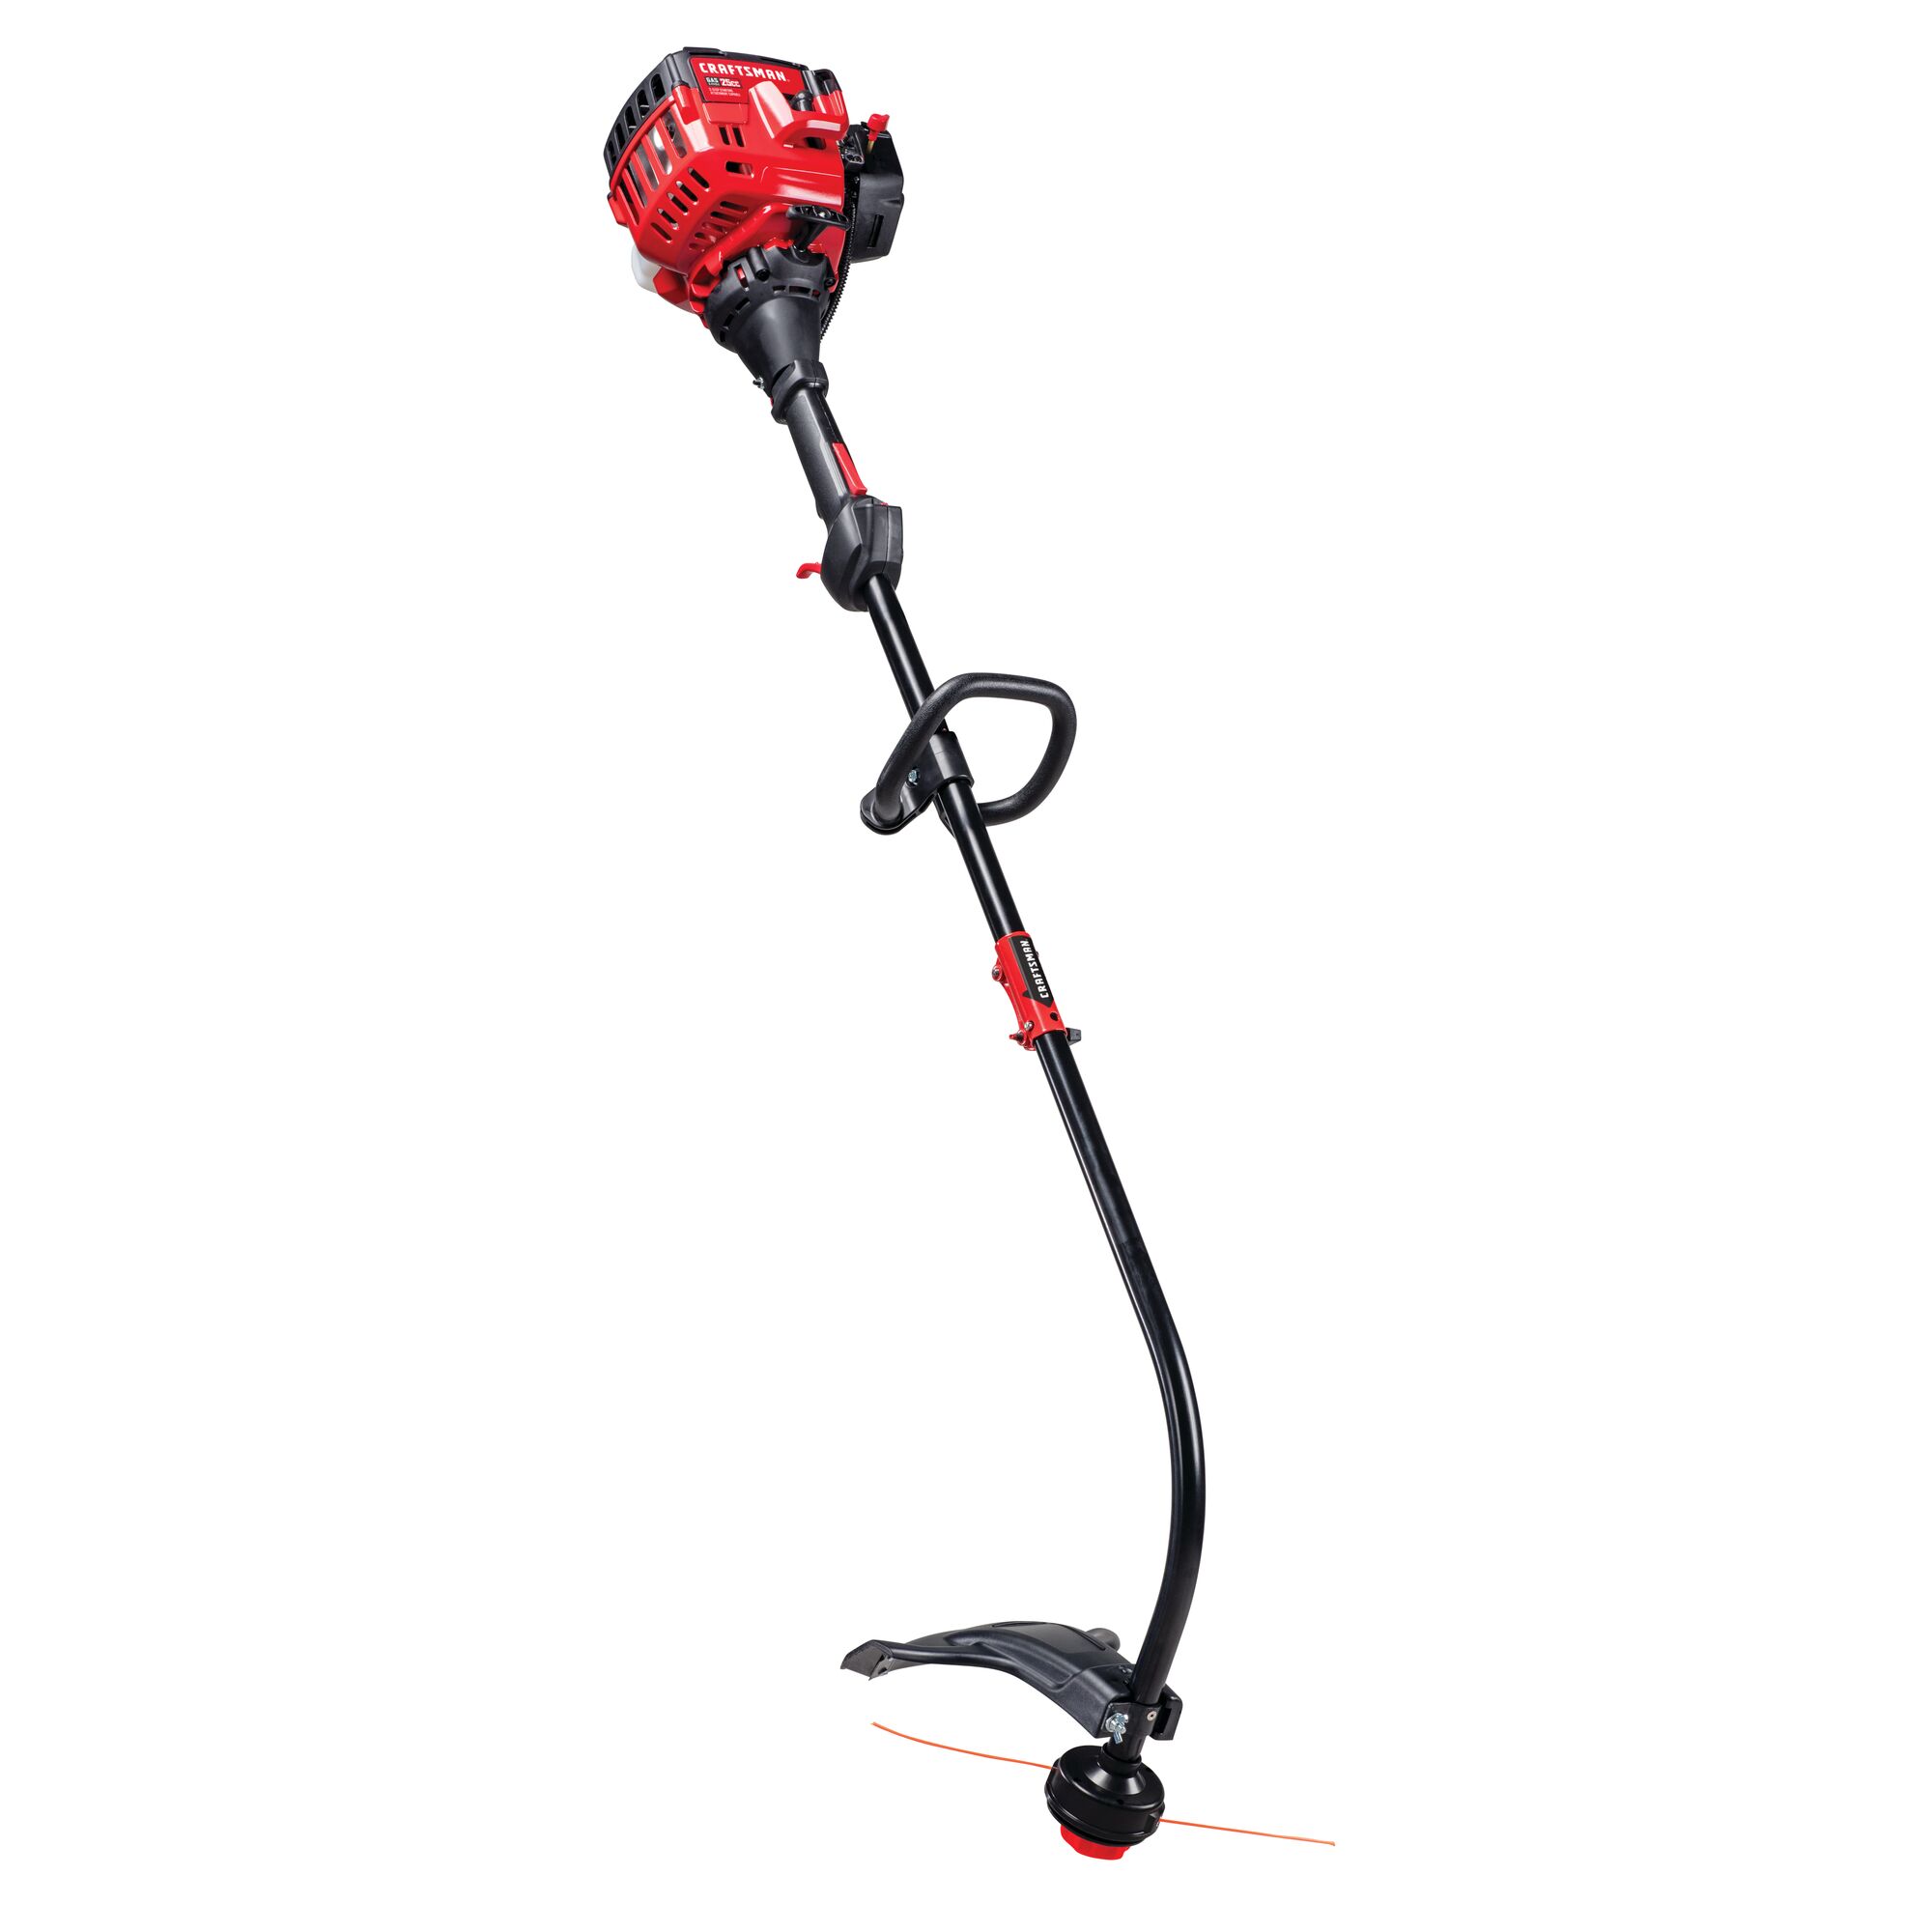 Left profile of 2 Cycle 17 inch attachment capable curved shaft gas weedwacker trimmer.